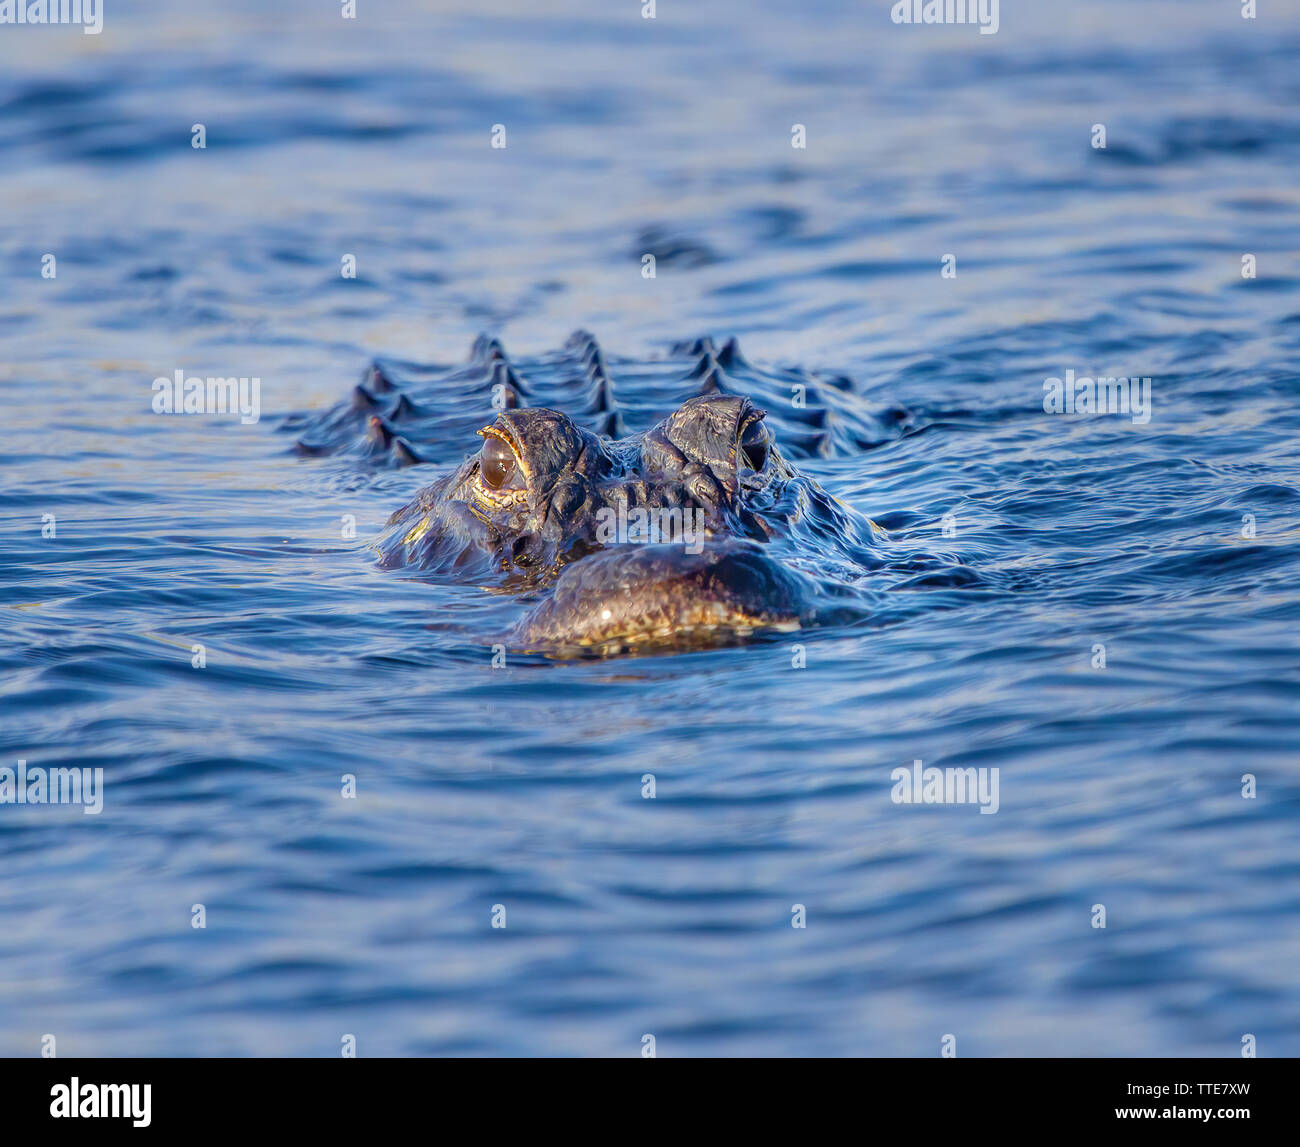 An American Alligator in the Florida Everglades. Alligators are fascinating creatures that have survived in some form or other since the dawn of time. Stock Photo